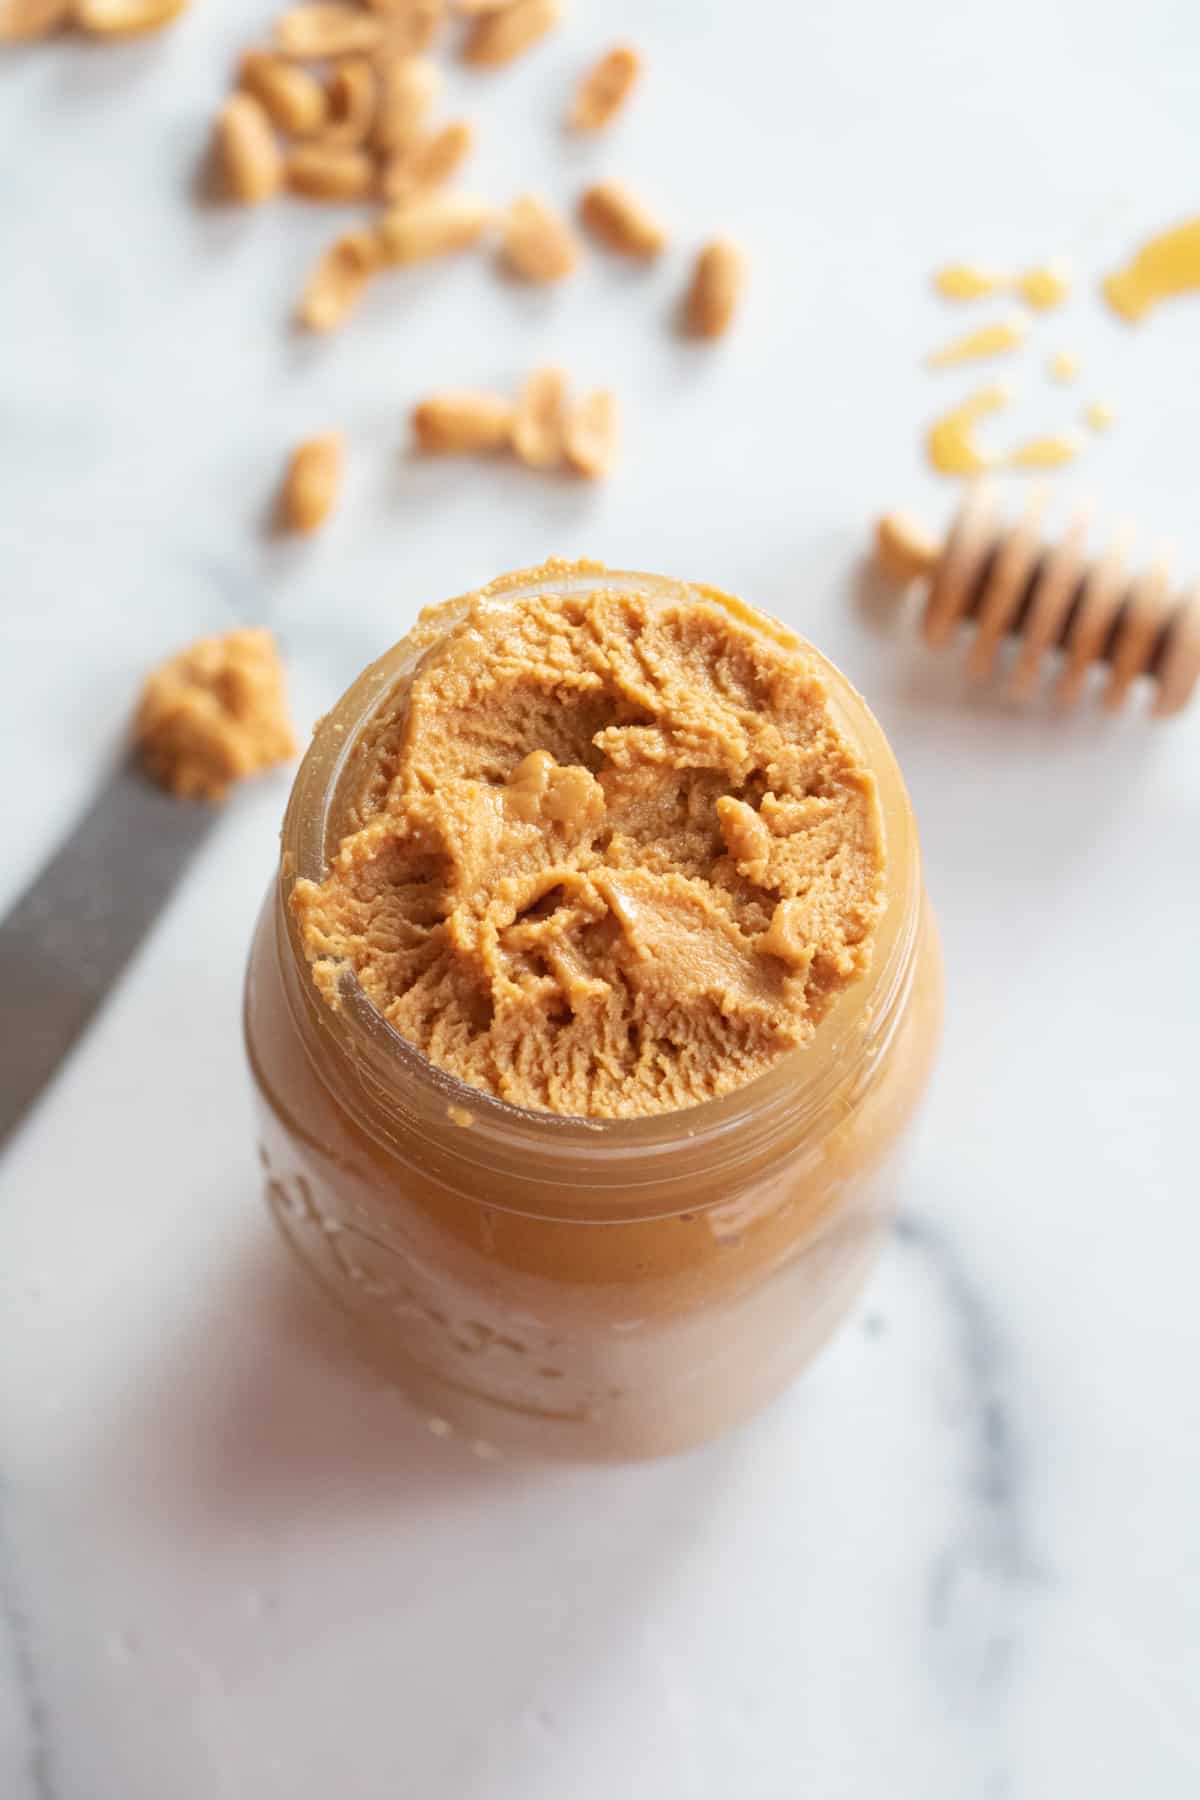 an overhead of an open jar of peanut butter with a knife next to it.